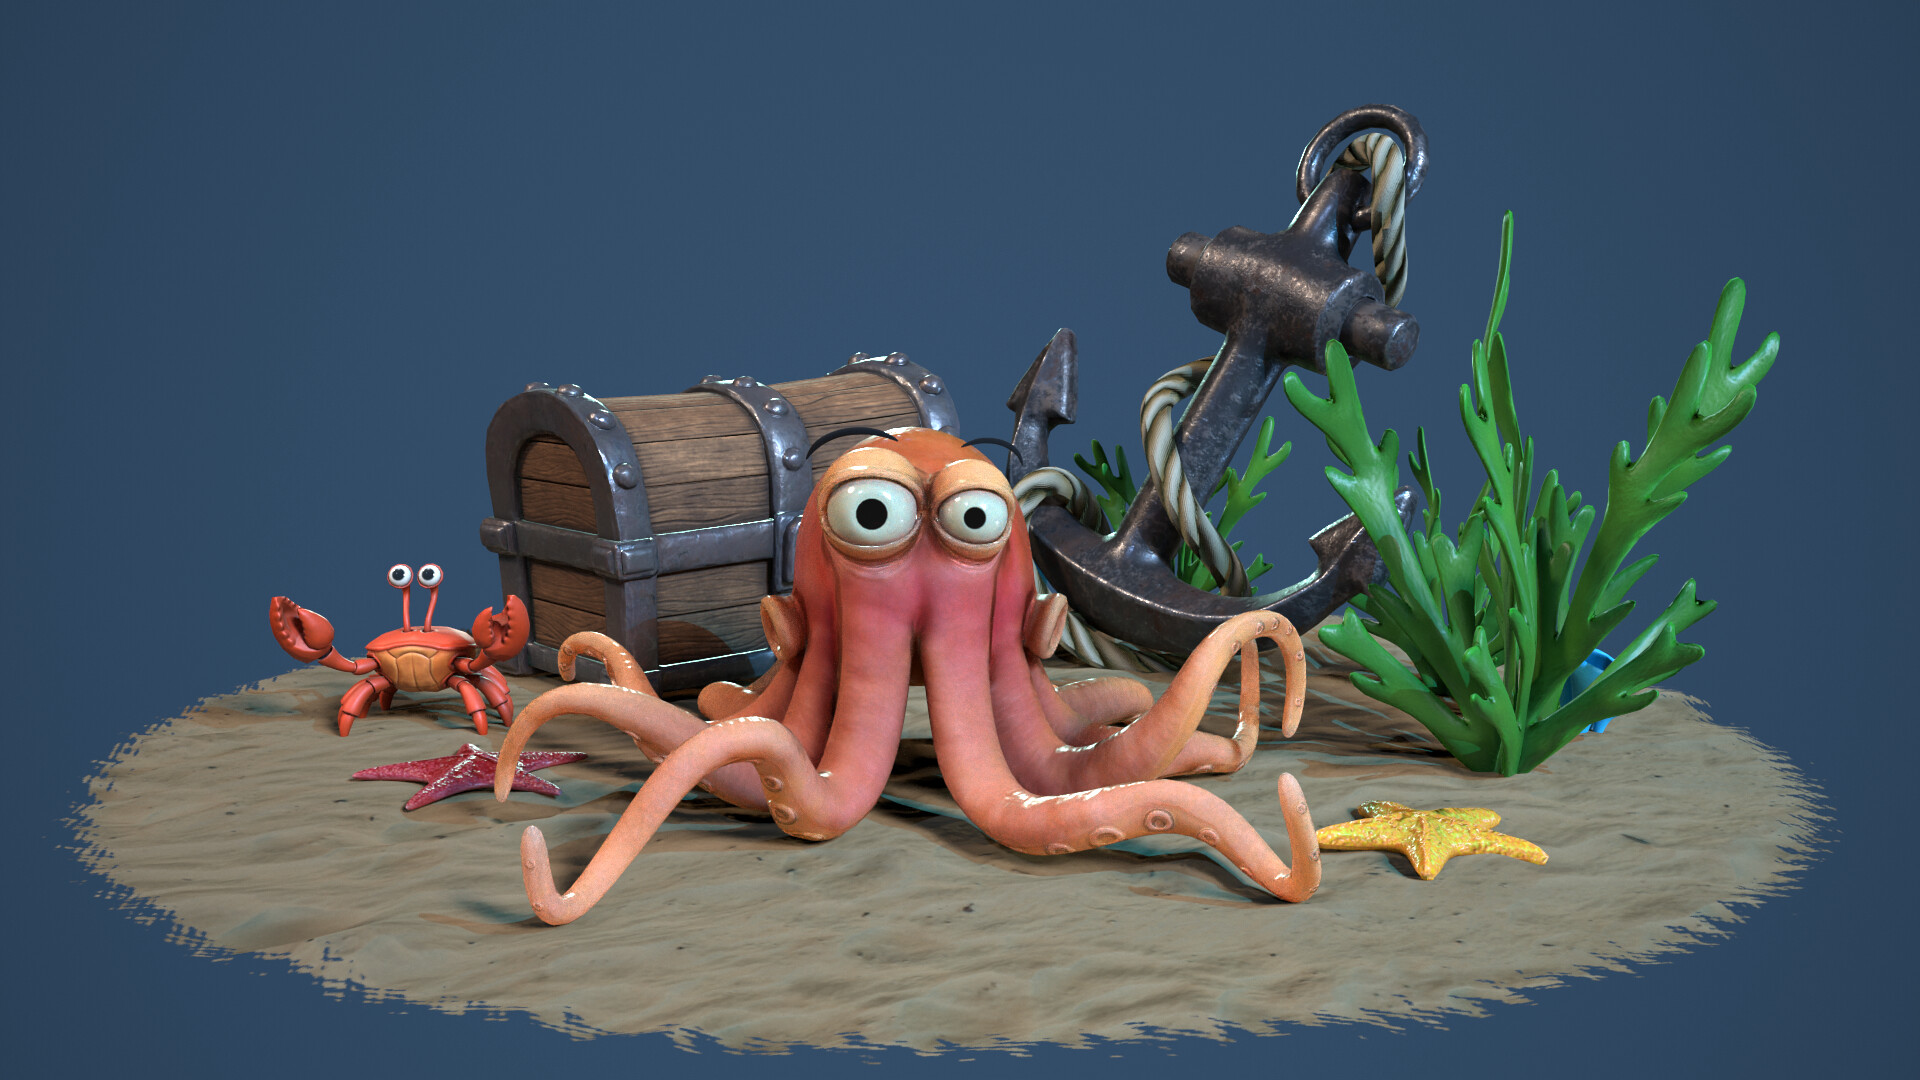 Buy PIPEROID Octo & Deca Mischievous Octopus & Crab - Japanese 3D